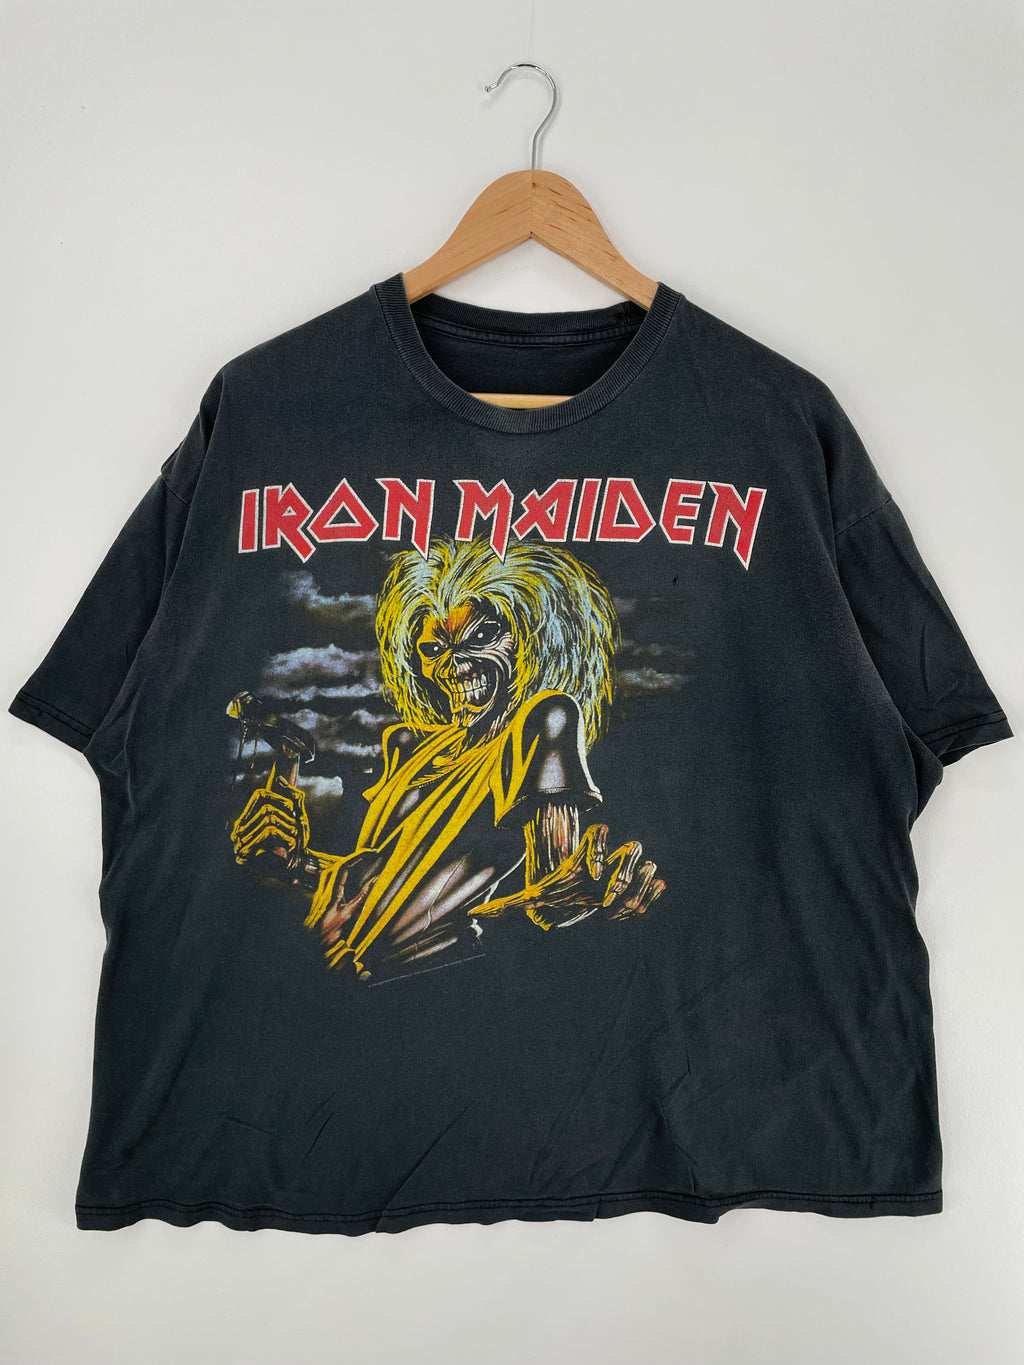 2009 IRAN MAIDEN Size No Tag (Approx.XL) Vintage Music T-shirts / Y484